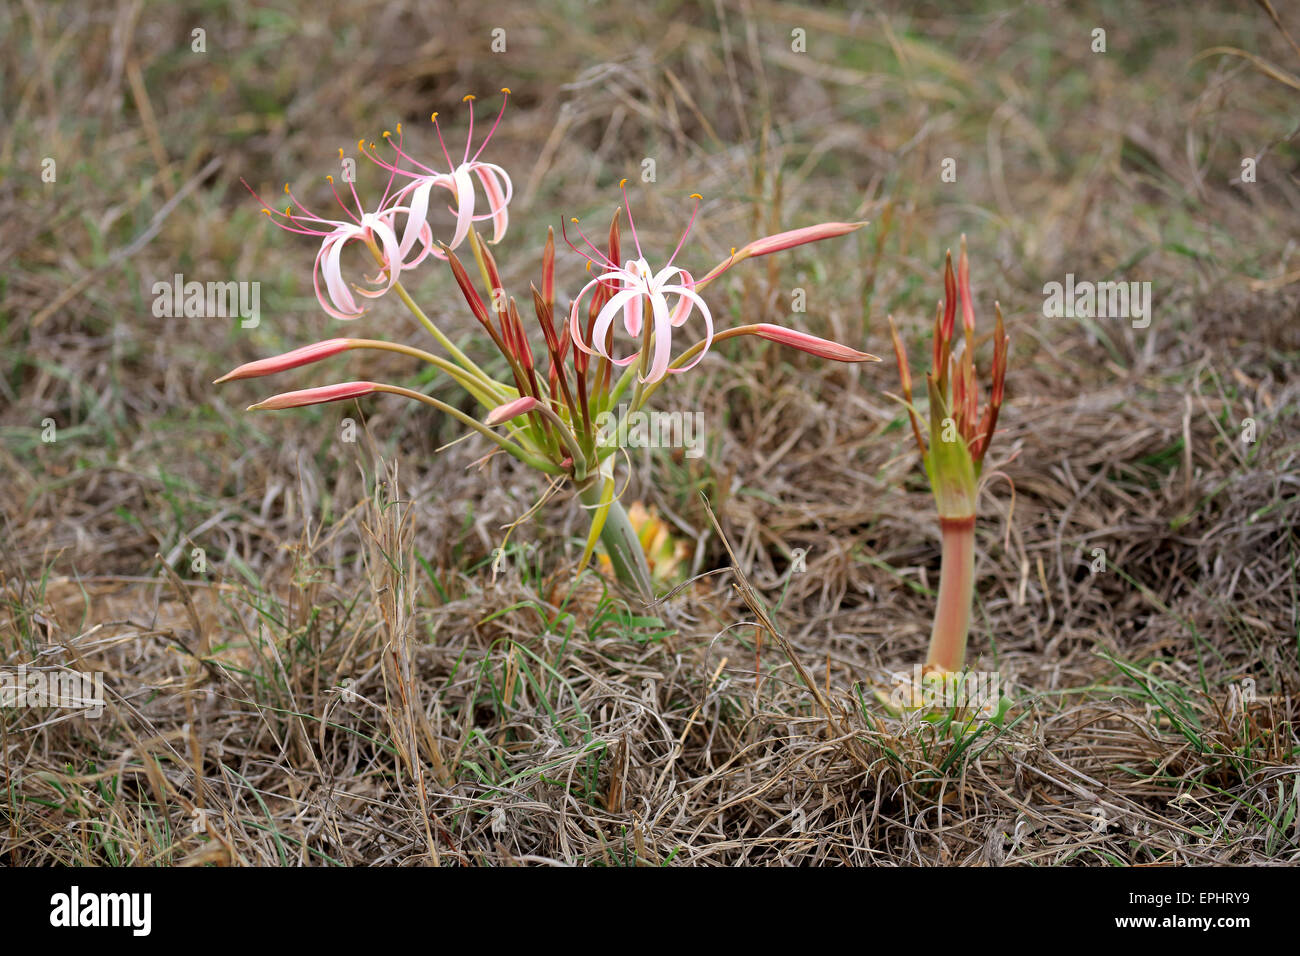 Flowering South African Crinum Lily (Crinum buphanoides), Kruger National Park, South Africa Stock Photo